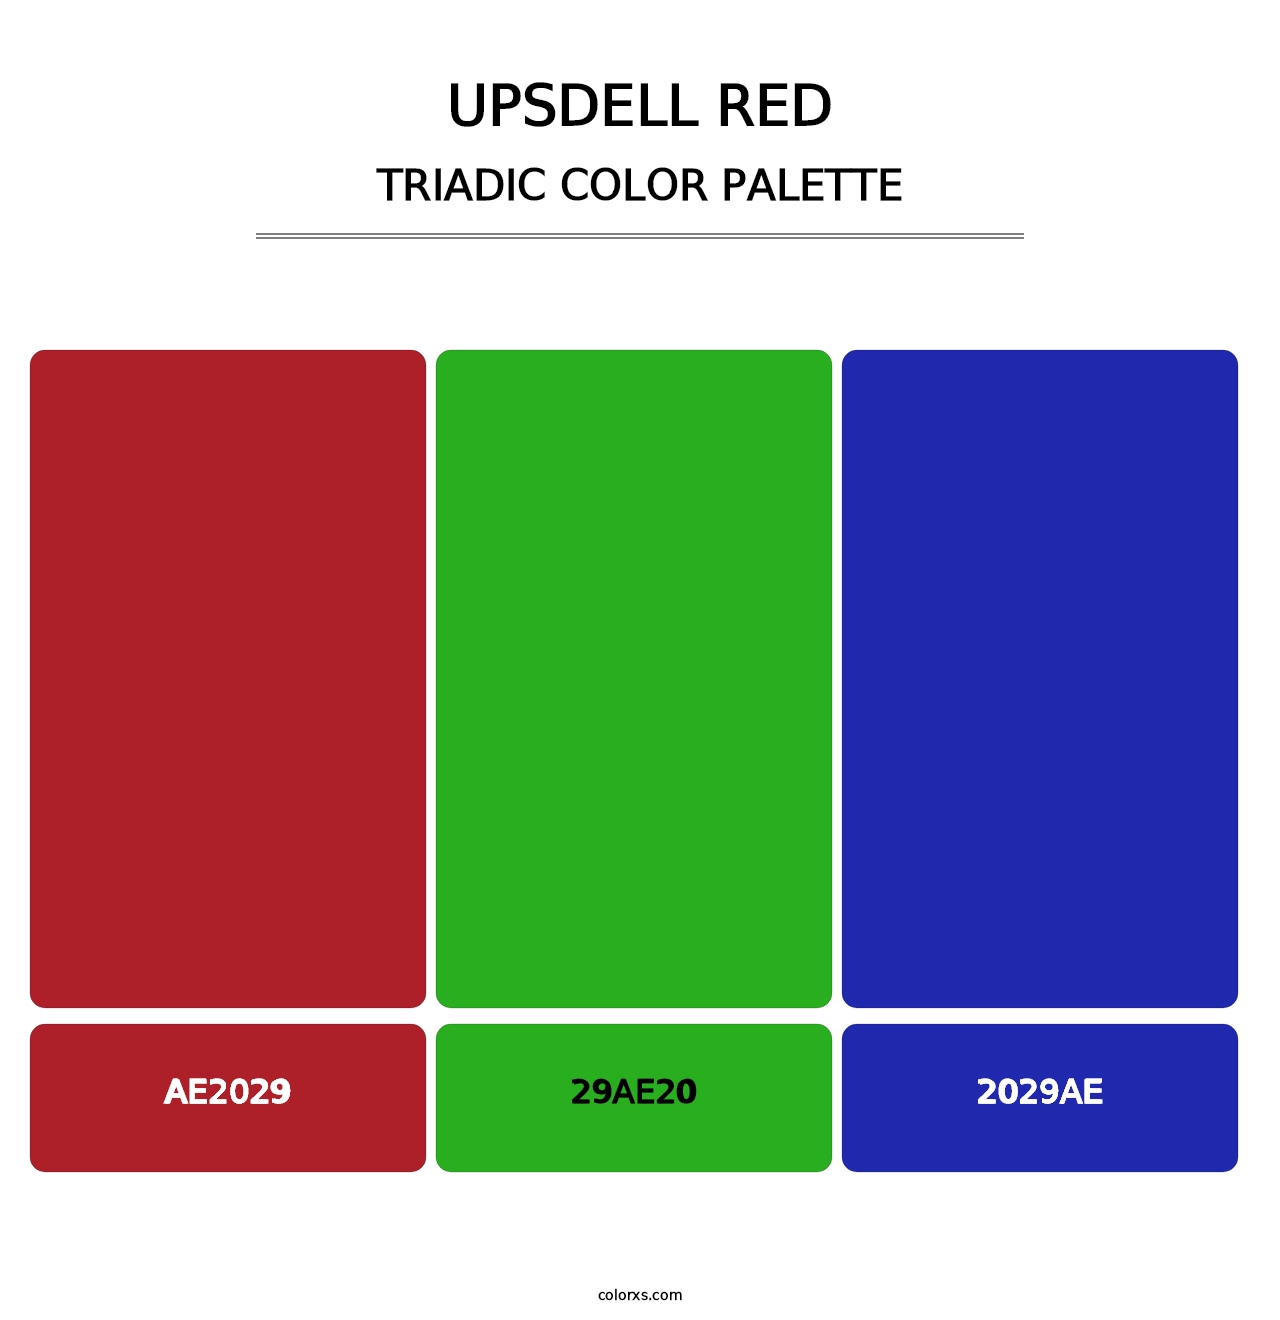 Upsdell Red - Triadic Color Palette